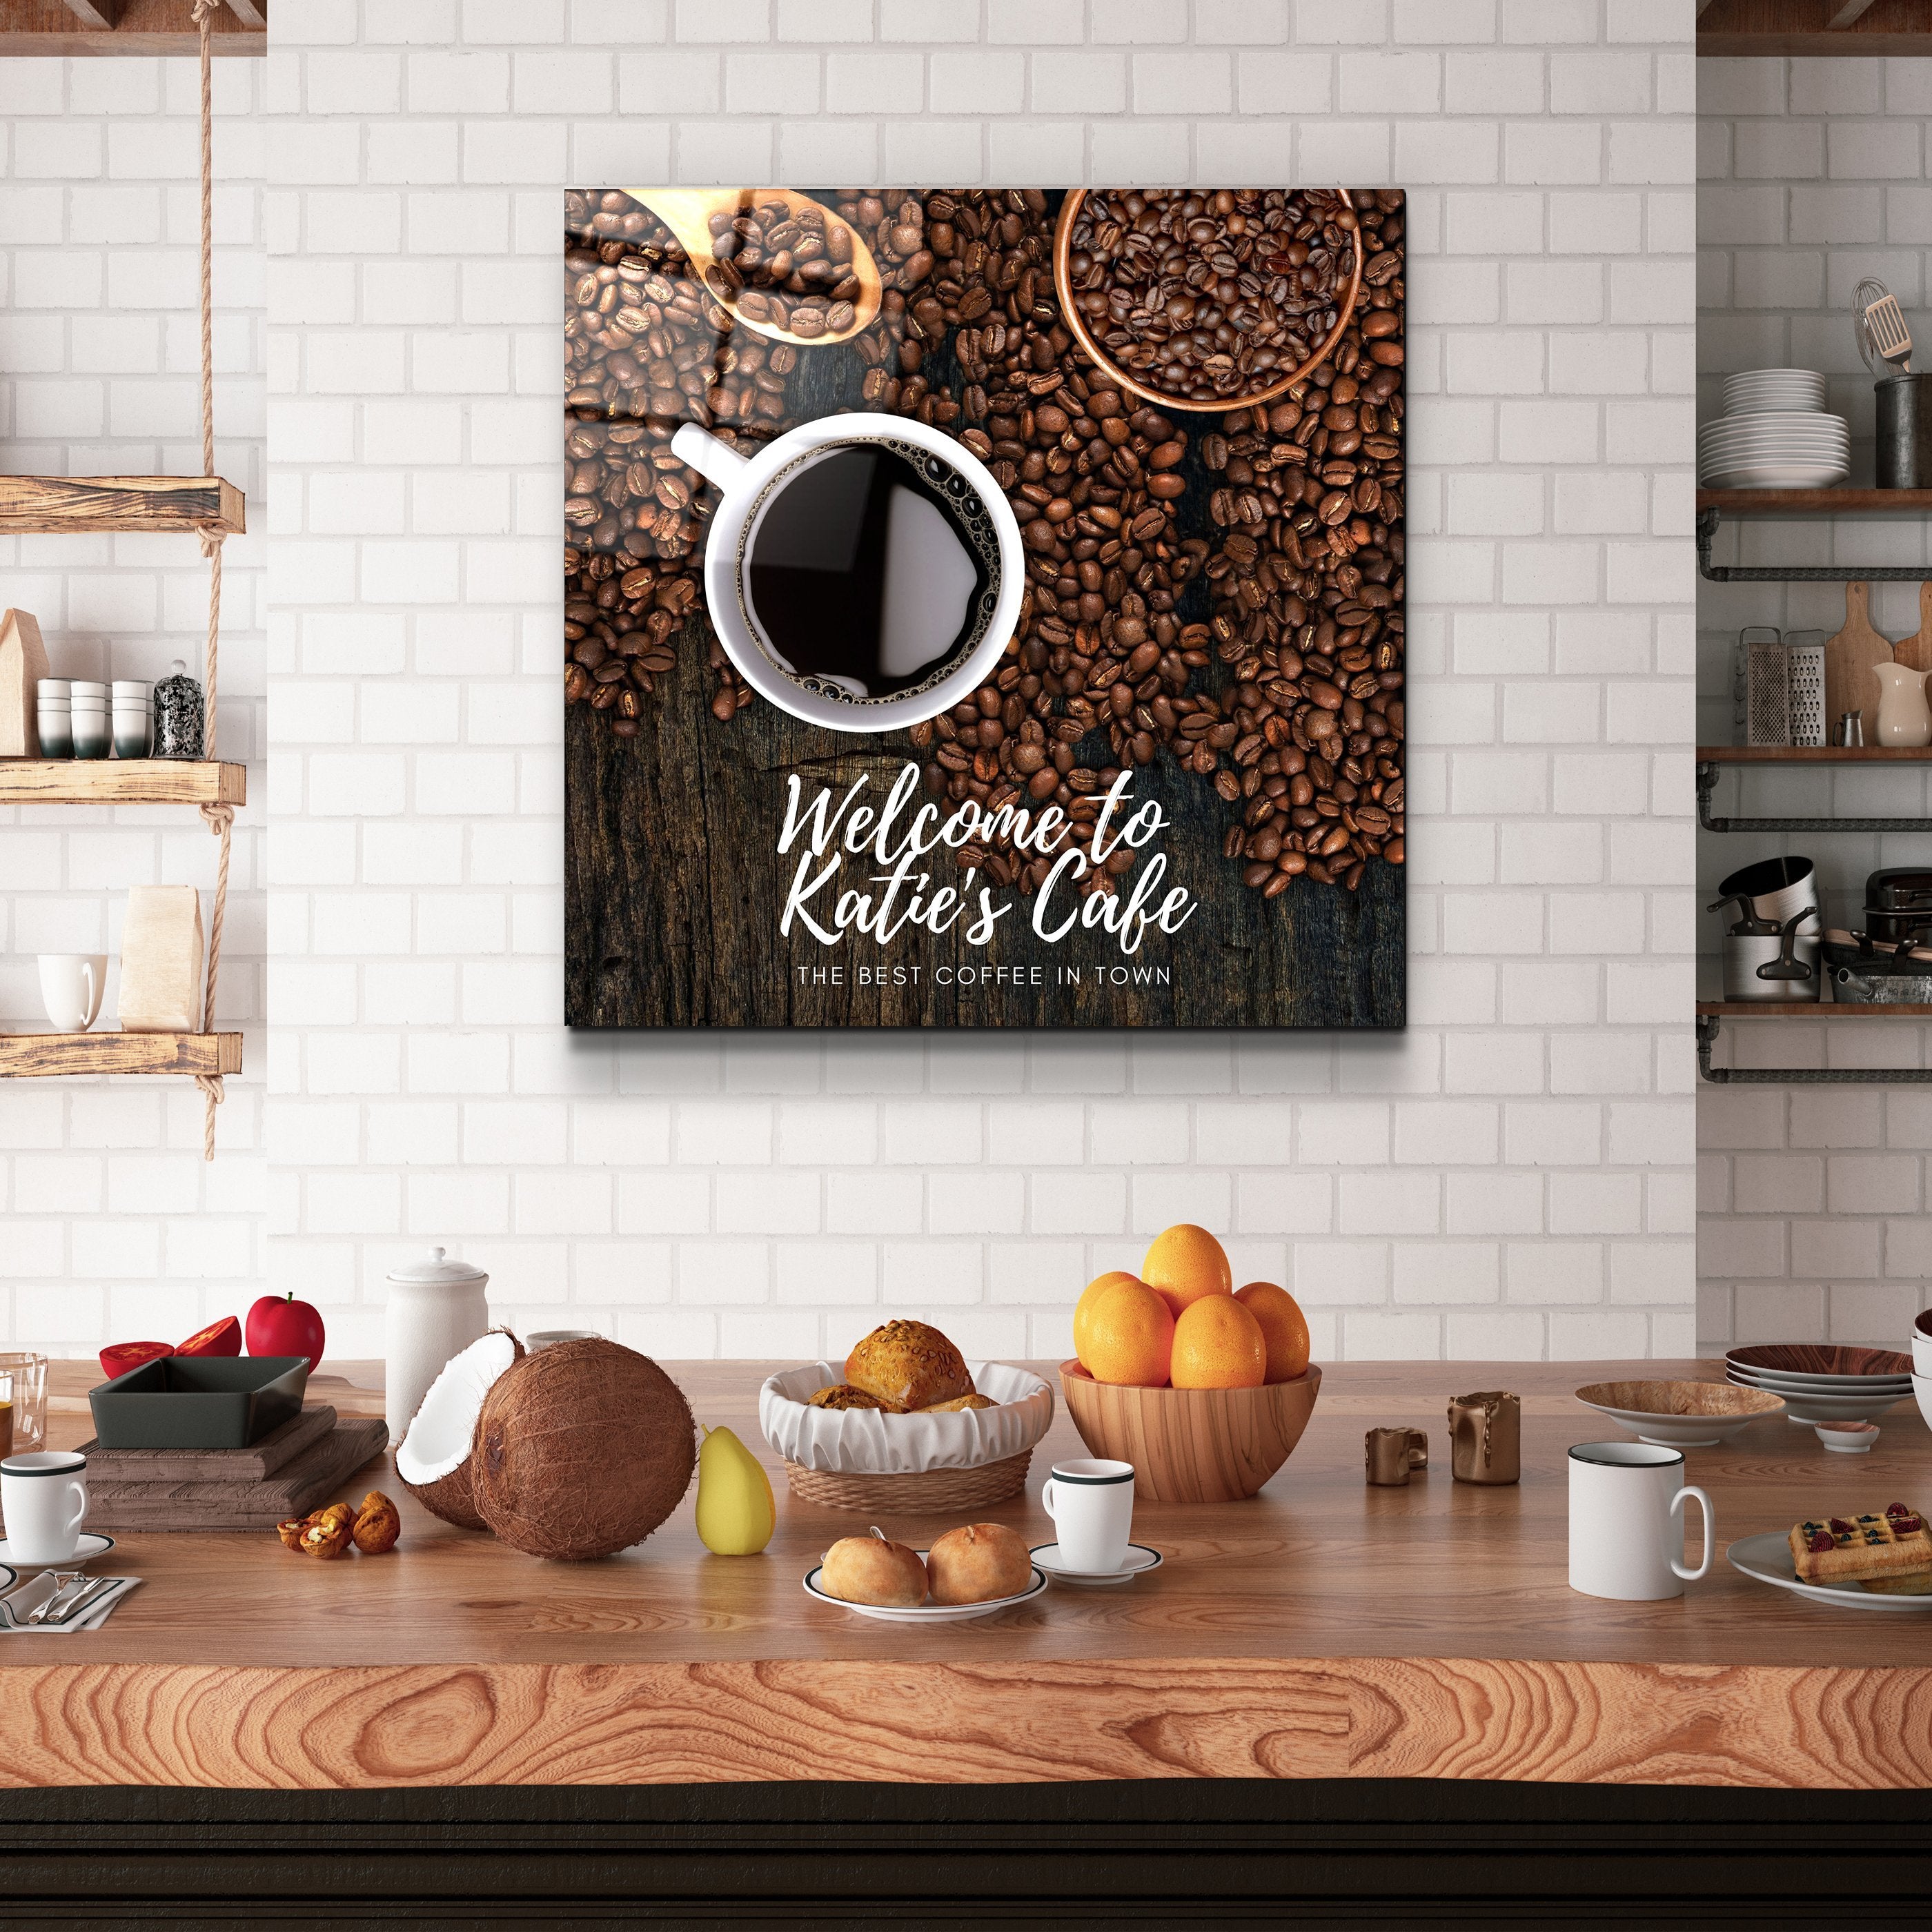 ."Custom Printing". Your Cafe - Kitchen Glass Wall Art